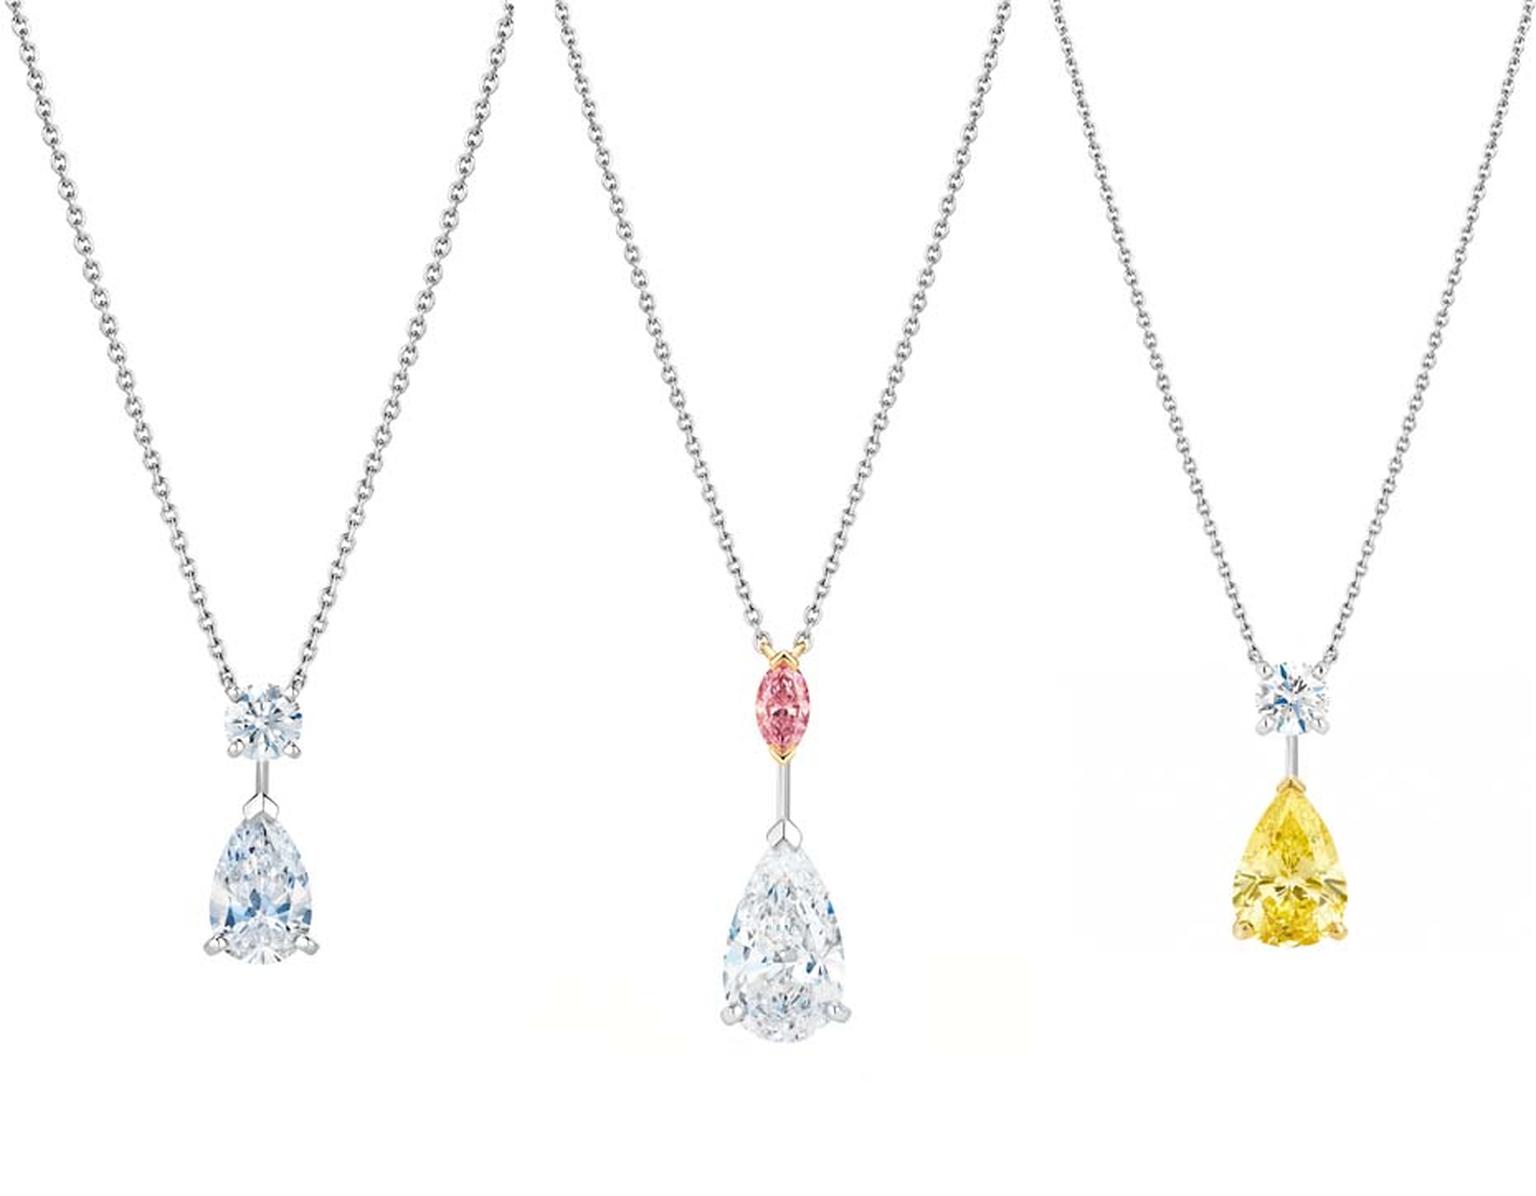 The new Drops of Light collection of De Beers diamond jewellery includes three pendant necklaces. White, pink and yellow diamond options are available, as well as matching earrings that can be worn in two different ways.